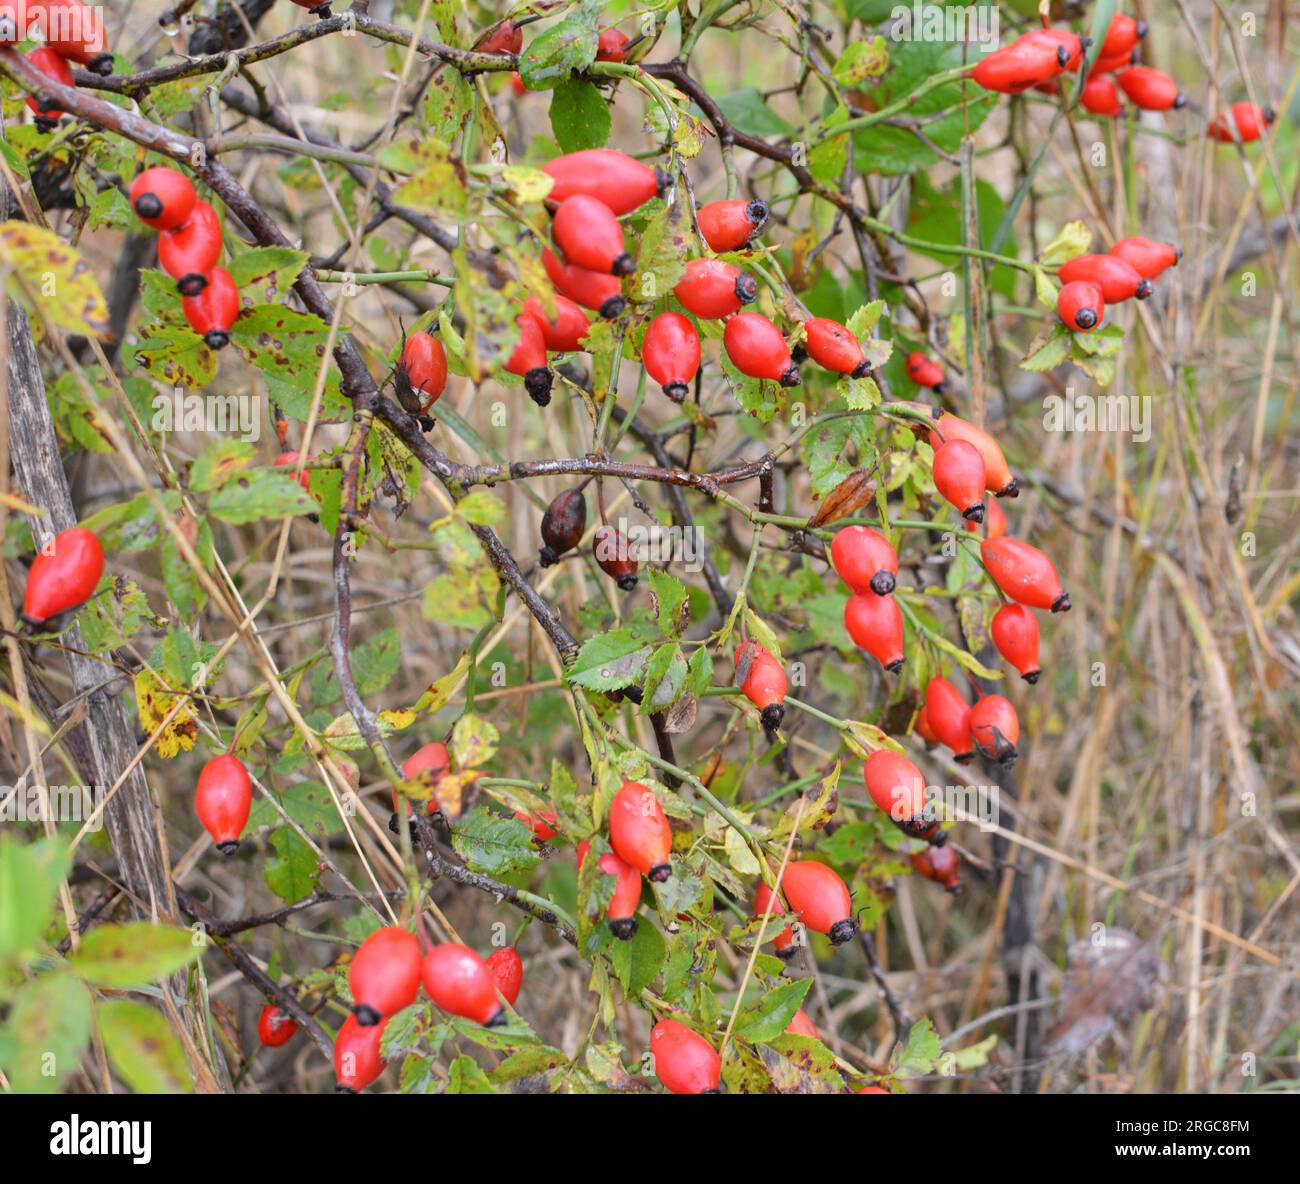 Red berries ripen on the branch of a dog rose bush Stock Photo